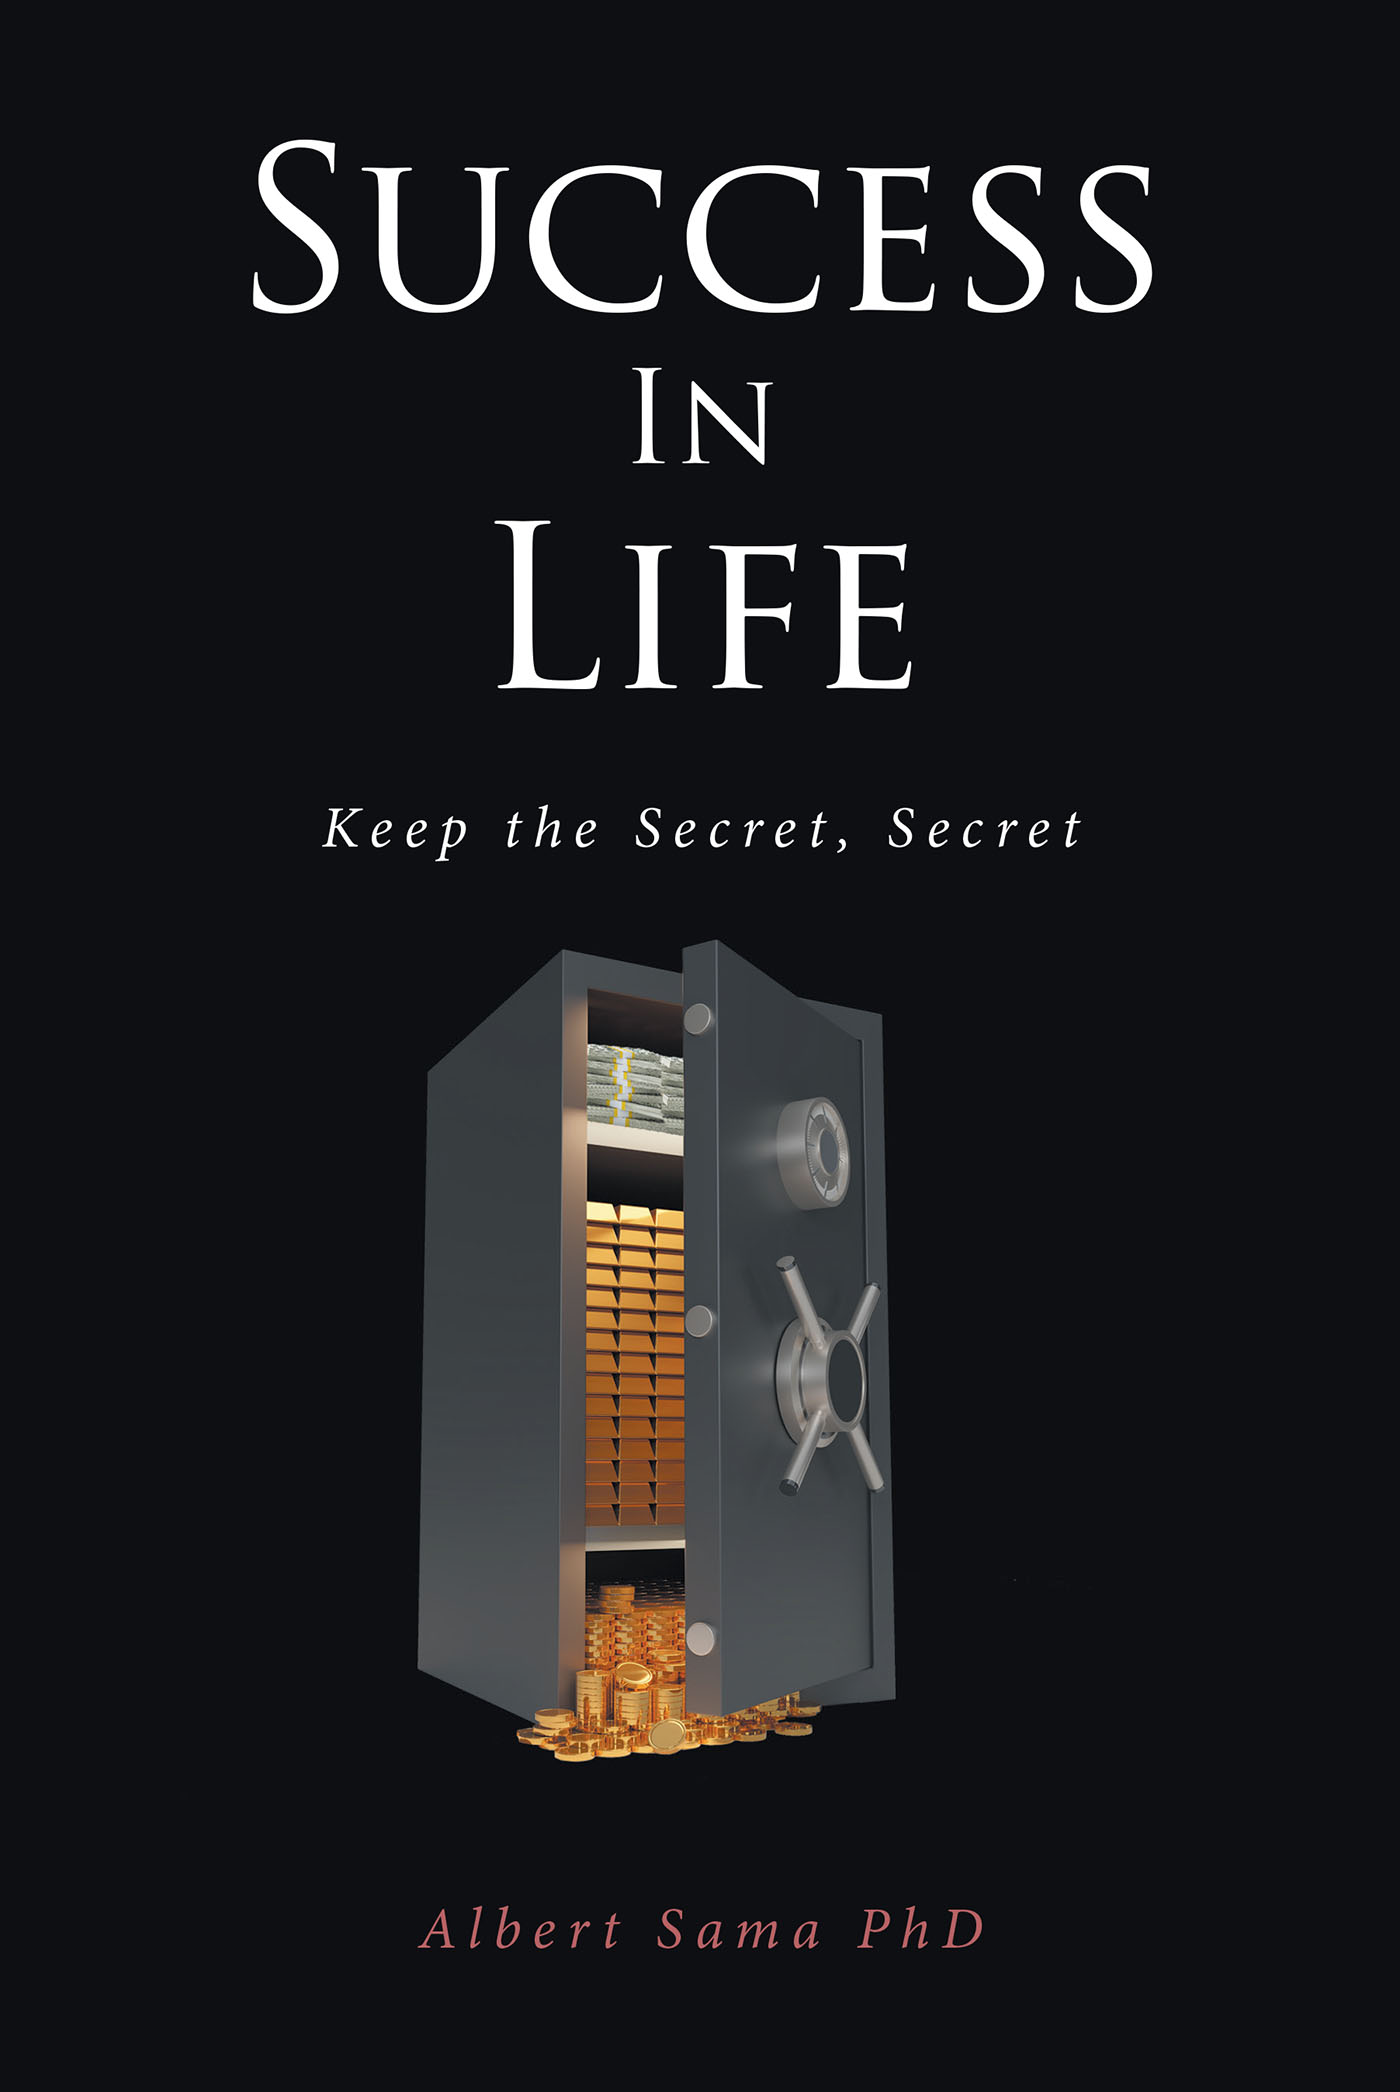 Albert Sama PhD’s Newly Released “SUCCESS IN LIFE: Keep the Secret, Secret” is an Encouraging Lesson on Being Slow to Share God’s Secrets